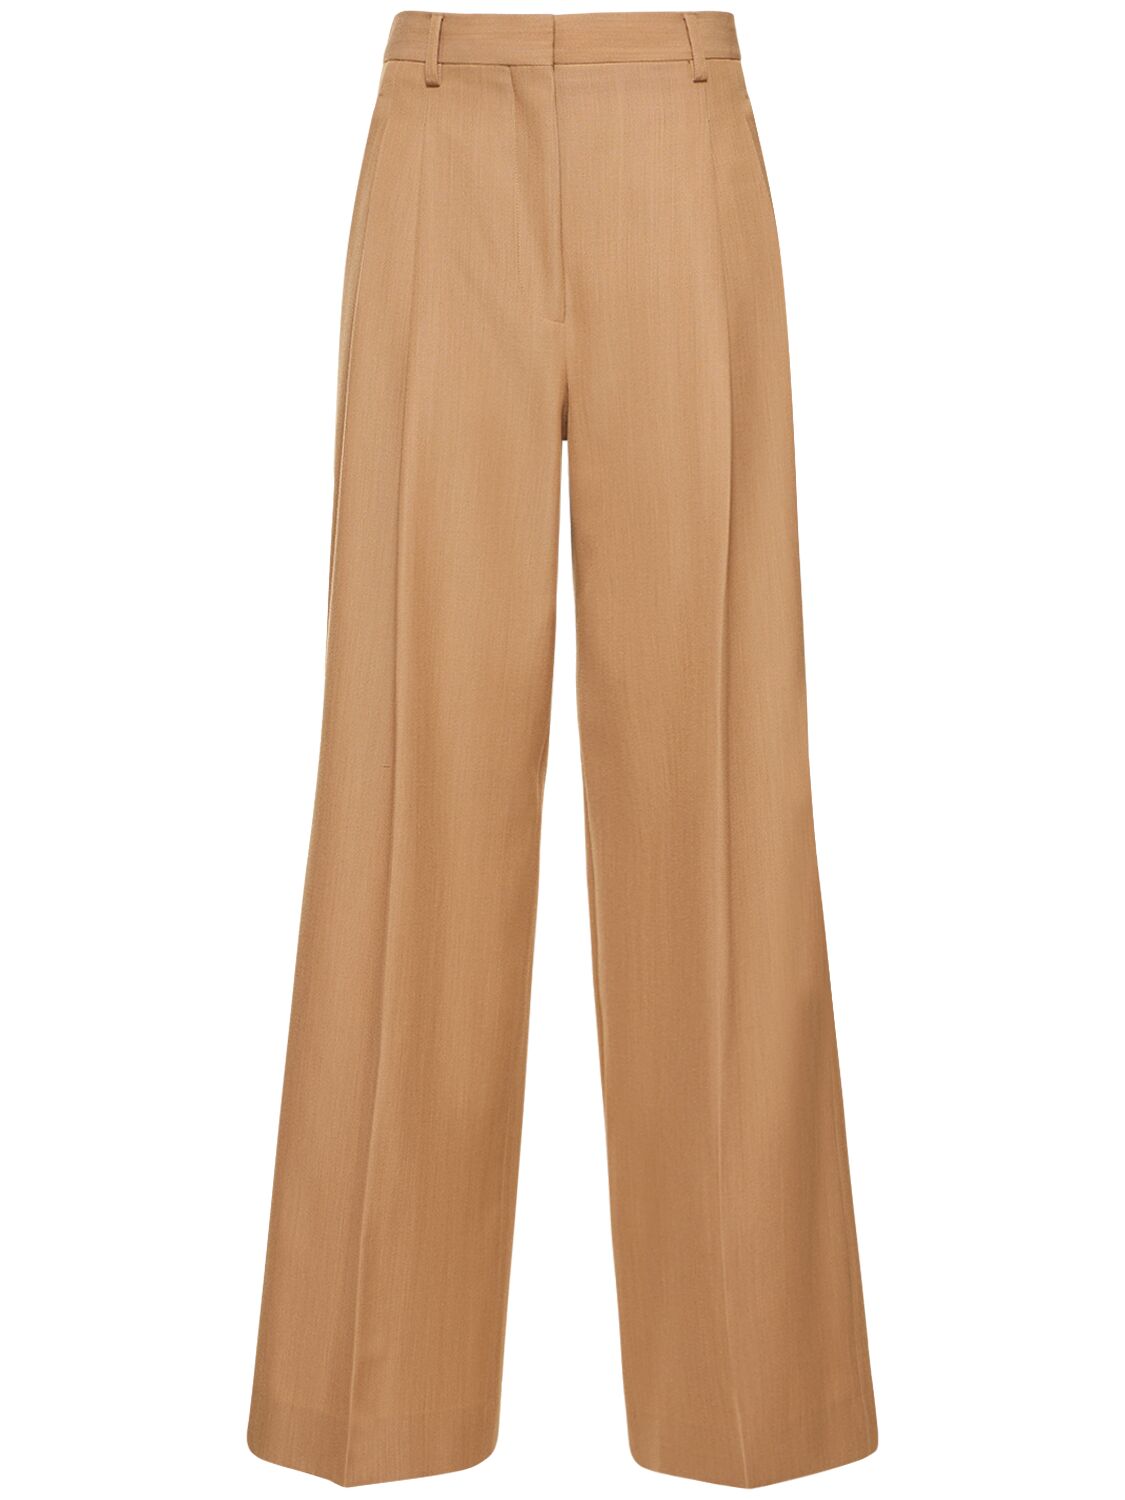 Burberry Madge Wool Twill Wide Pants In Camel Melange